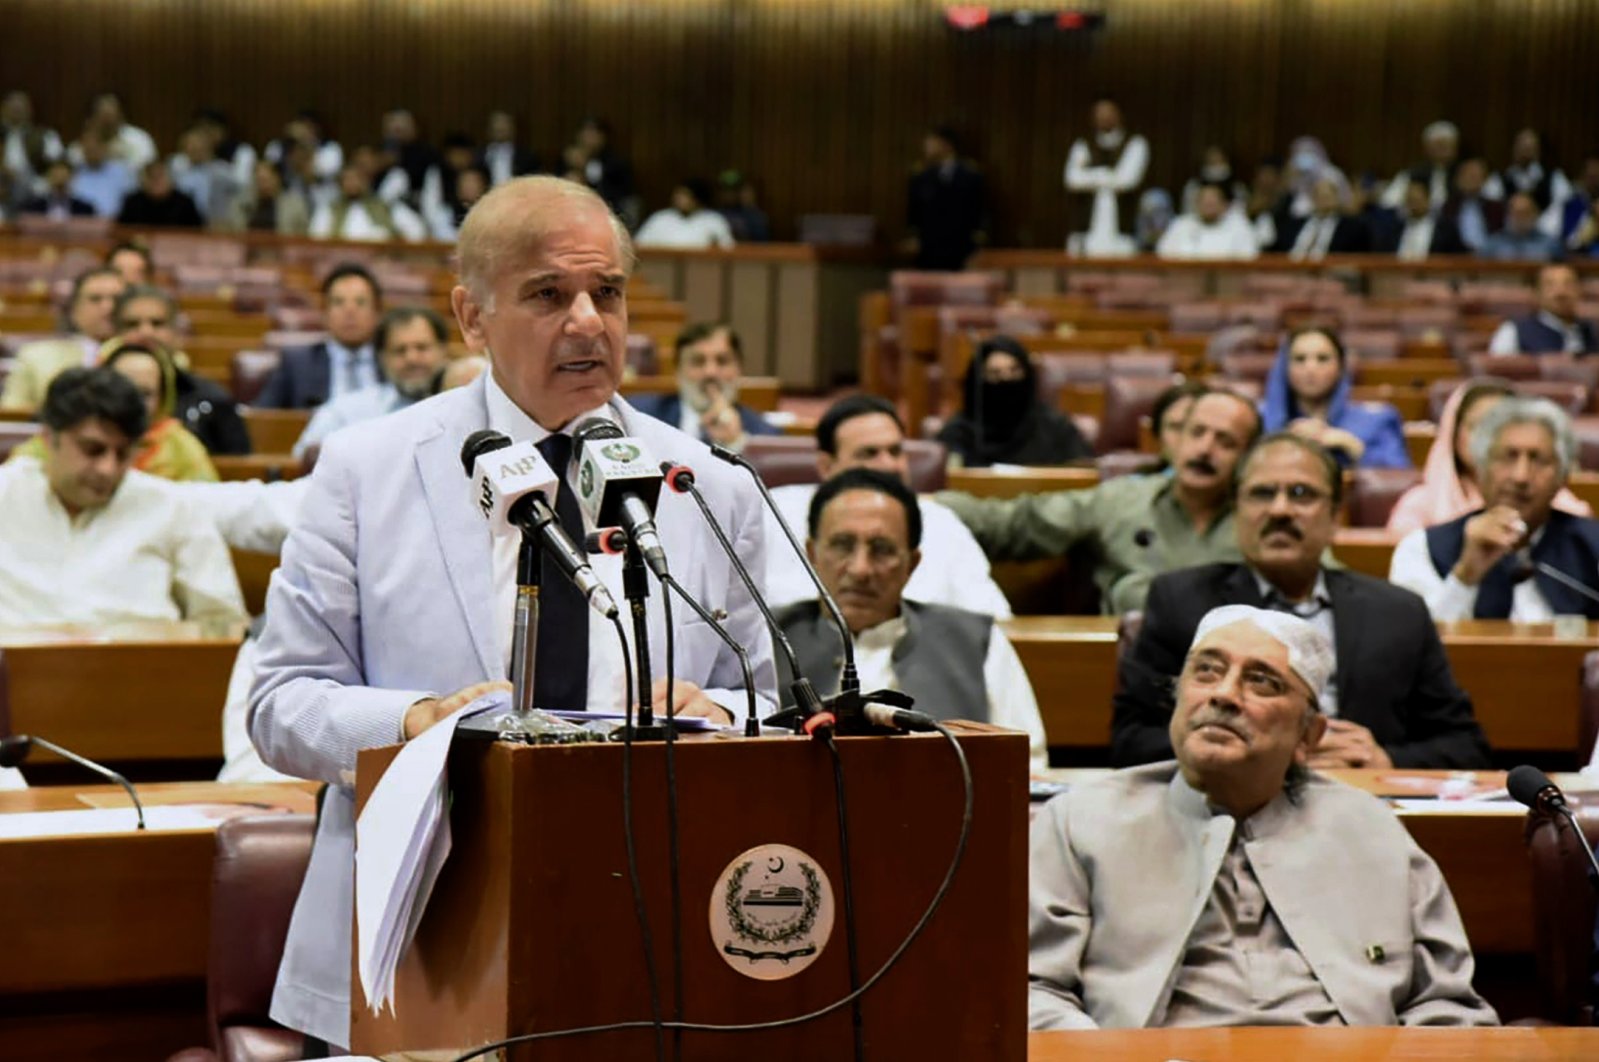 Newly-elected Pakistani Prime Minister Shahbaz Sharif addresses the National Assembly in Islamabad, Pakistan, April 11, 2022. (Press Information Department via AP)